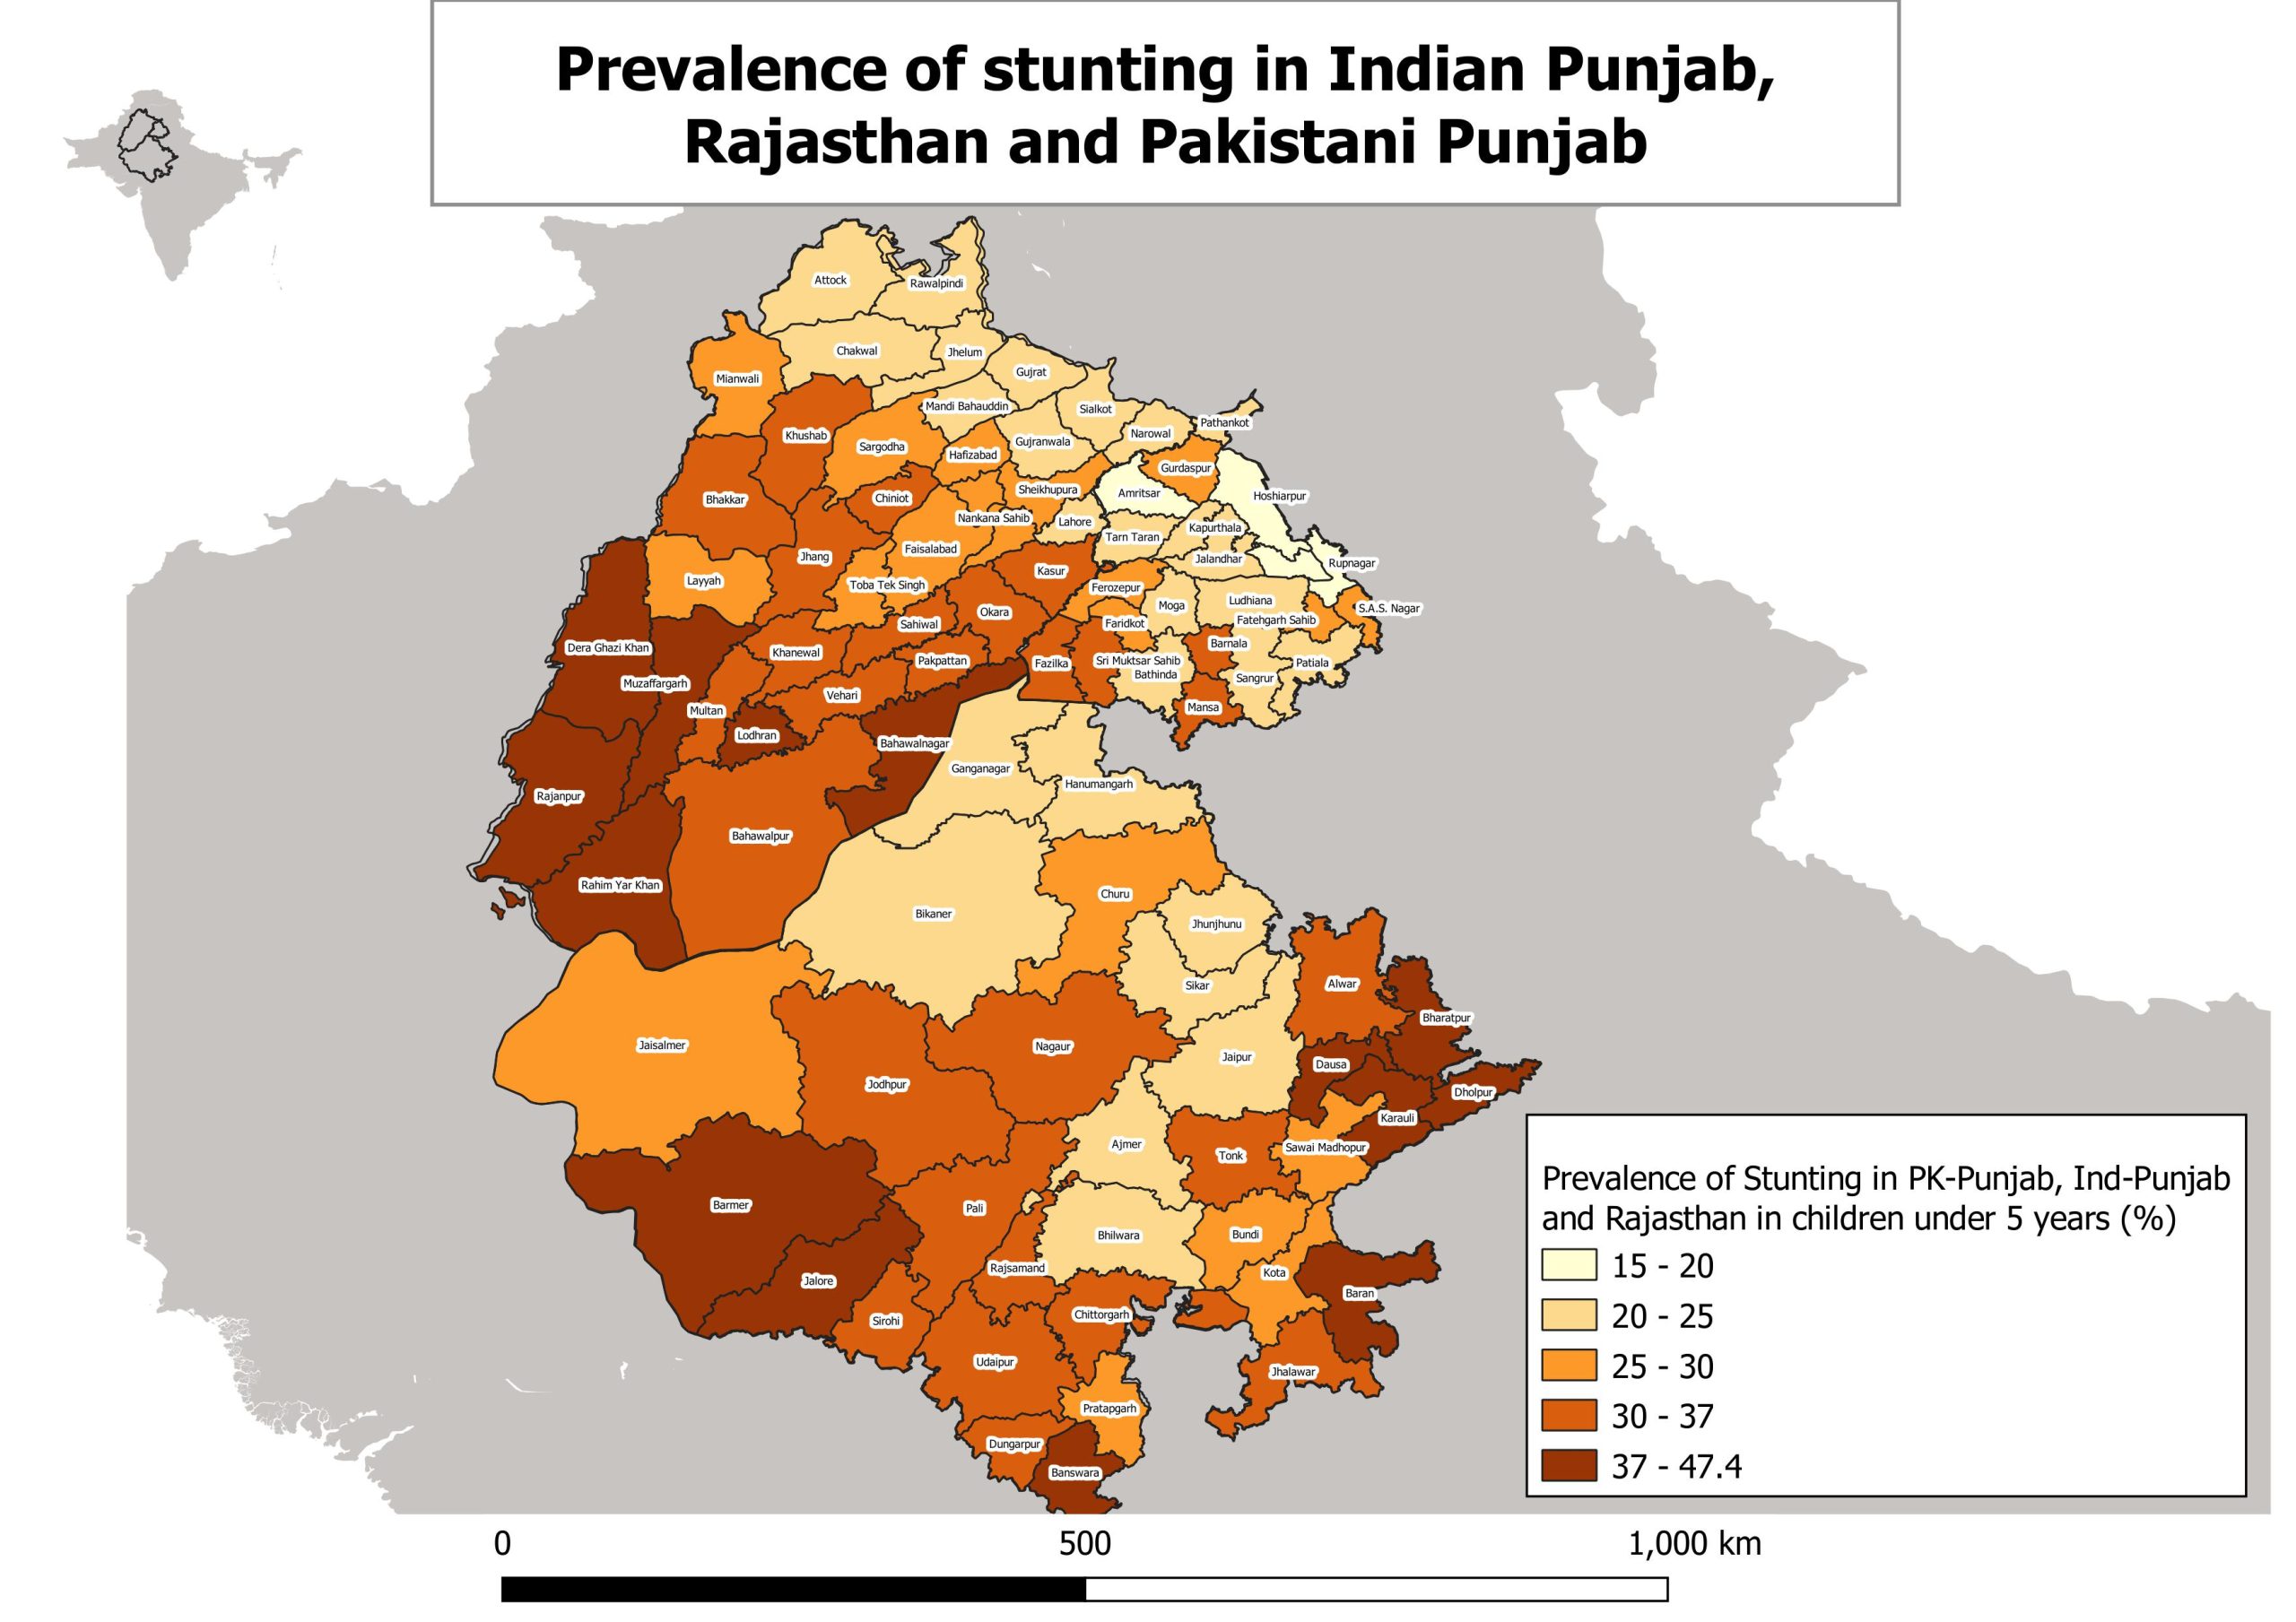 Map showing the prevalence of stunting in Indian Punjab, Rajasthan, and Pakistani Punjab